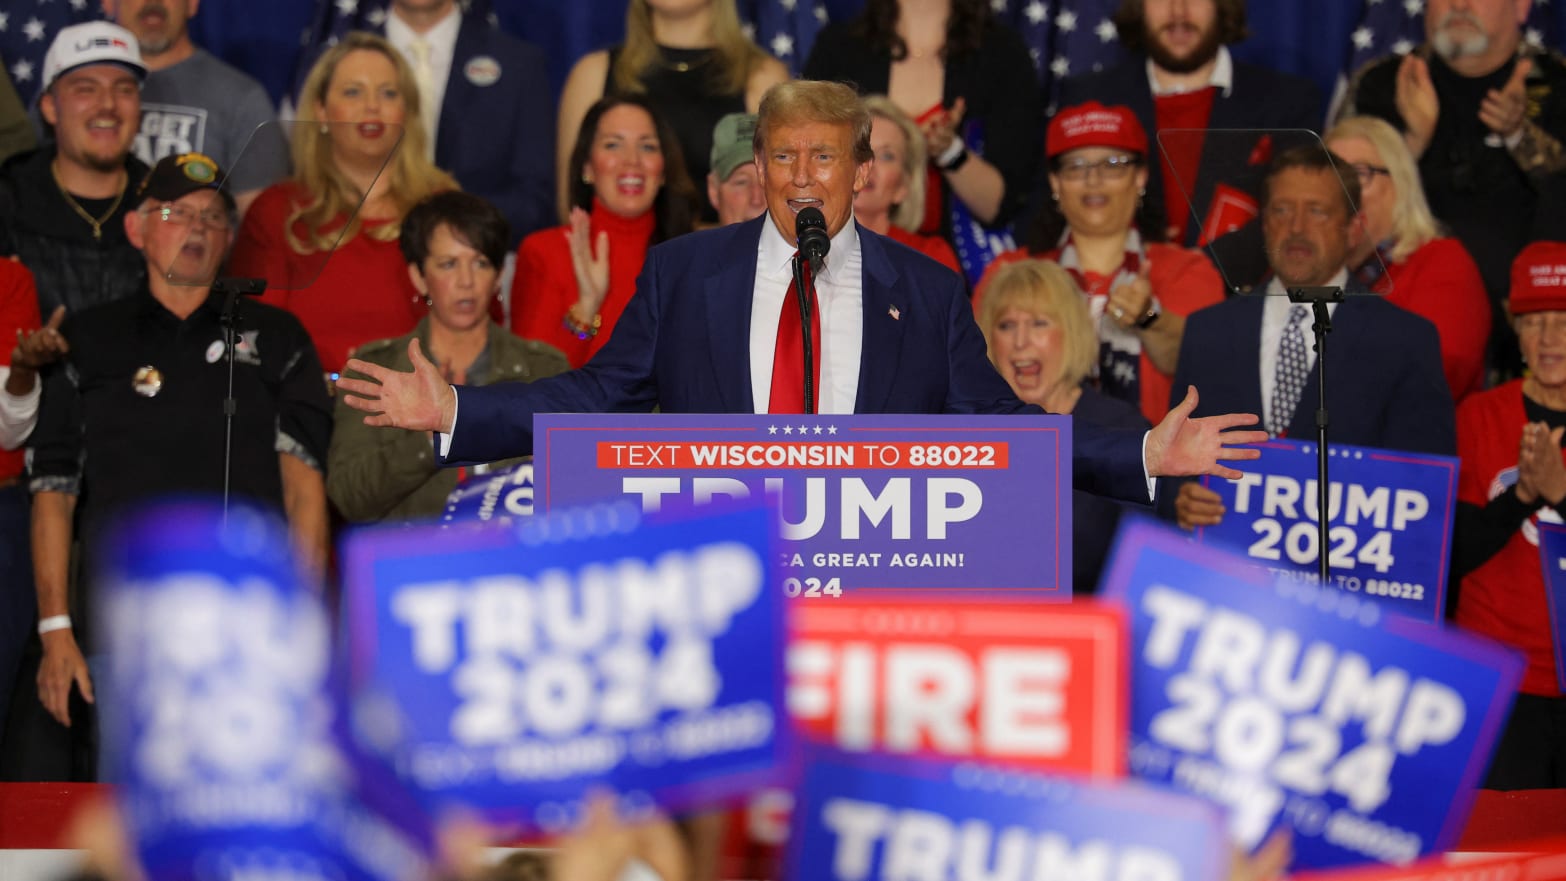 Republican presidential candidate and former U.S. President Donald Trump speaks during a campaign rally in Green Bay, Wisconsin, U.S., April 2, 2024.